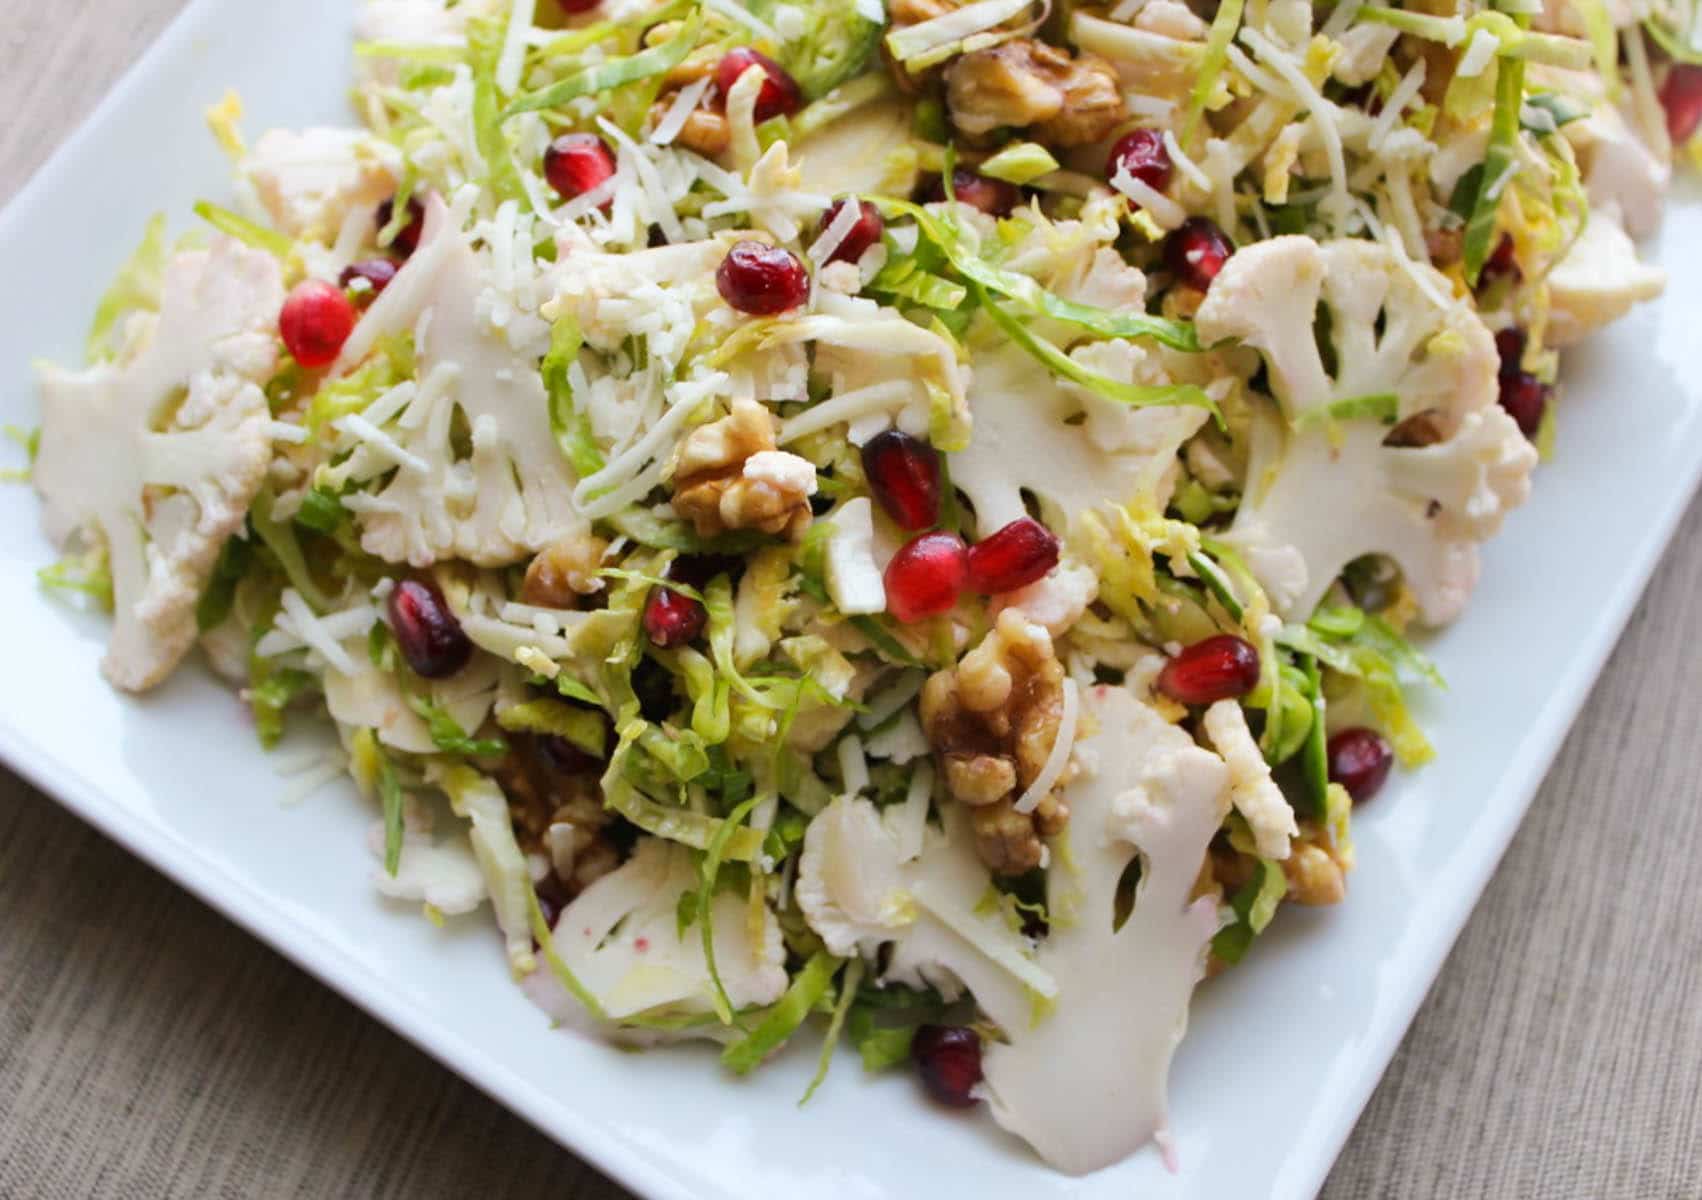 Shaved-Brussels-Sprout-and-Cauliflower-Salad-with-Pomegranate-Walnuts-Pecorino